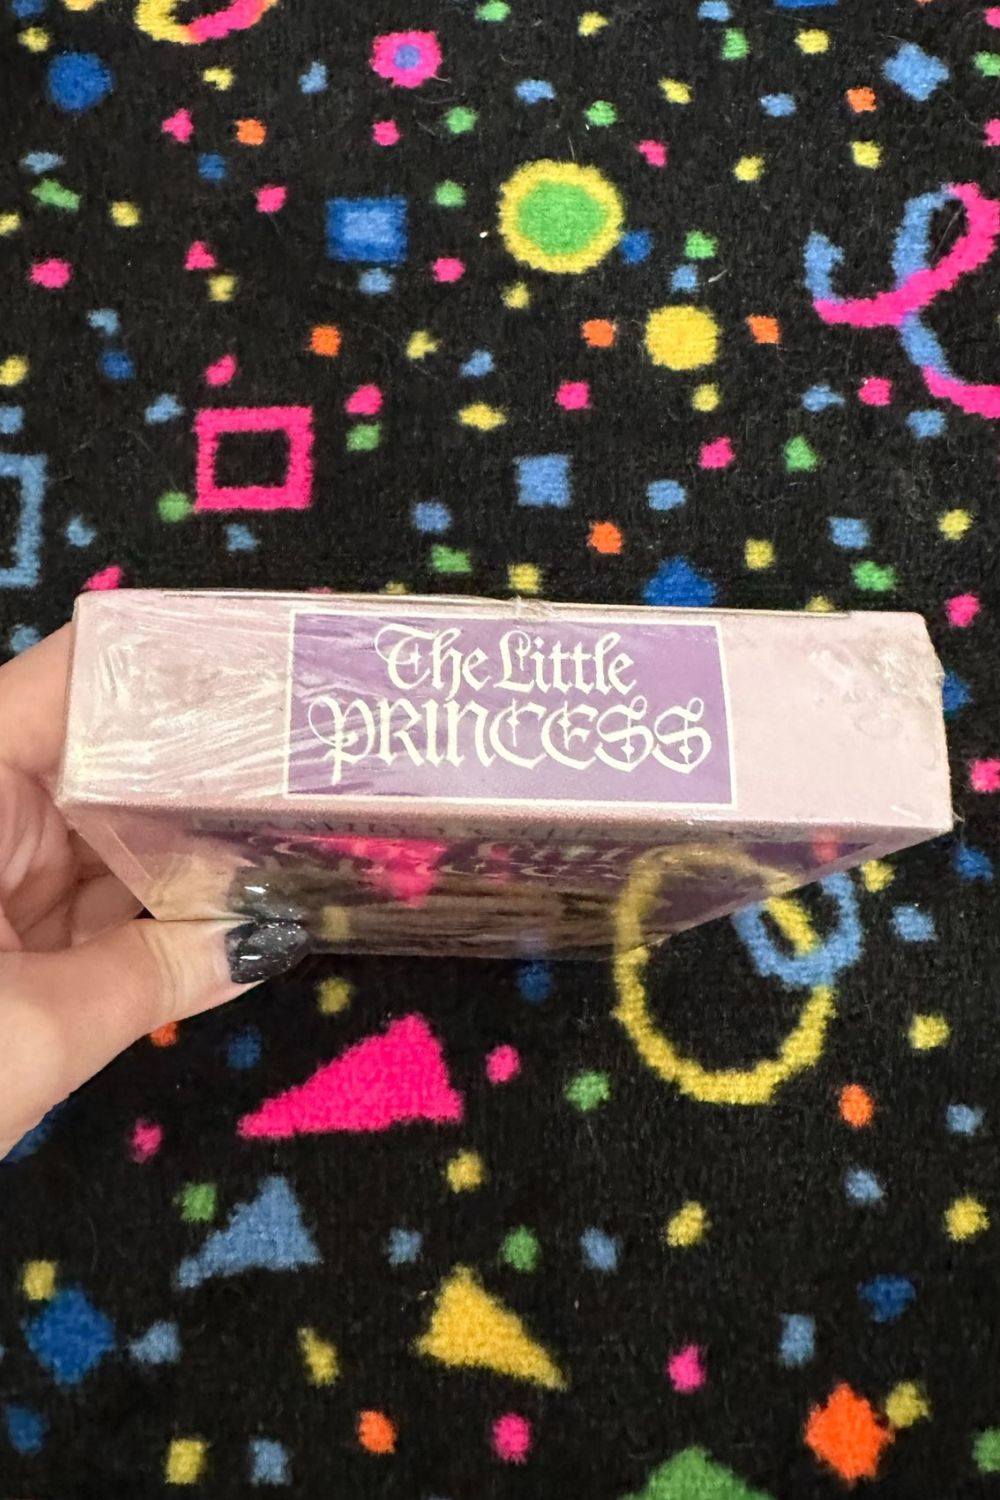 THE LITTLE PRINCESS VHS IN COLOR (SEALED)*